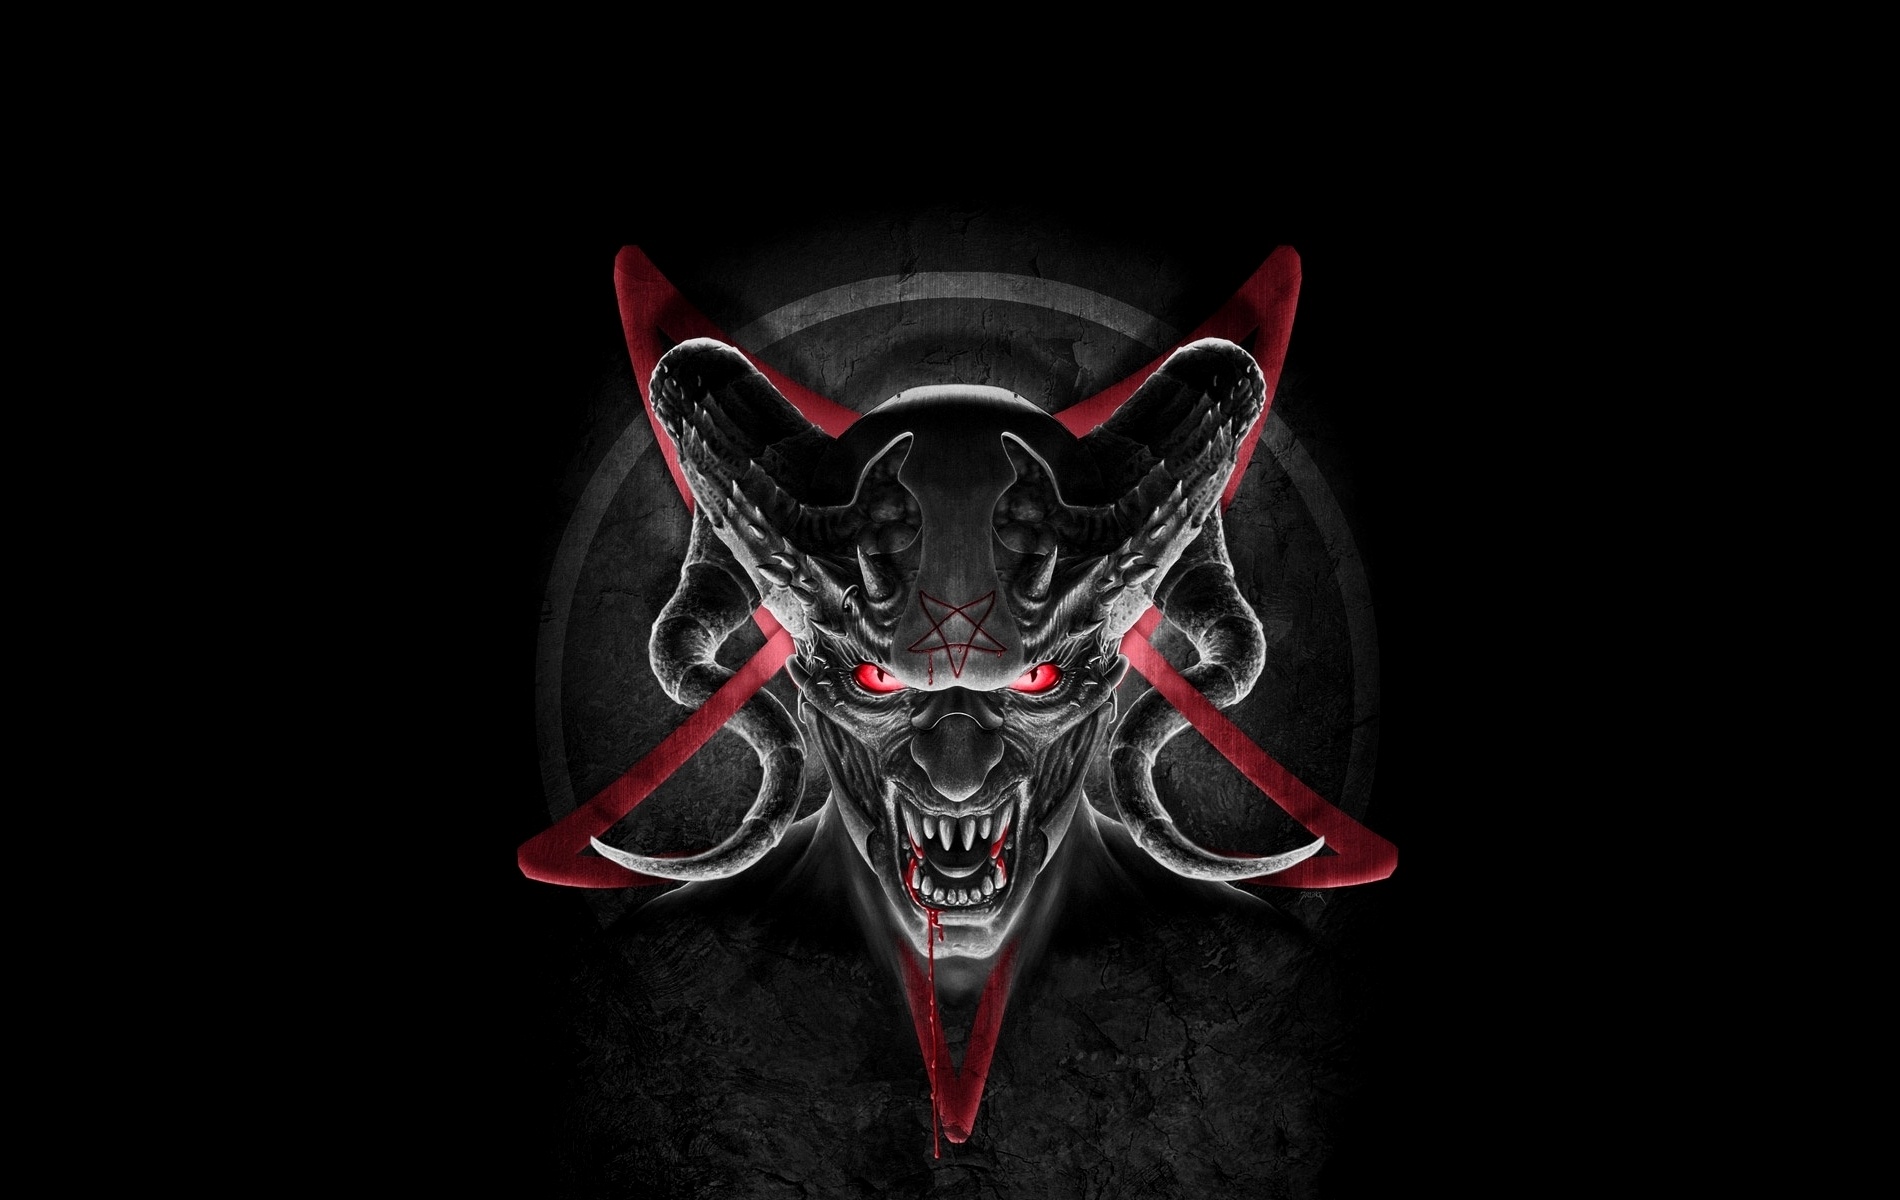 Satanic Wallpaper Submited Image